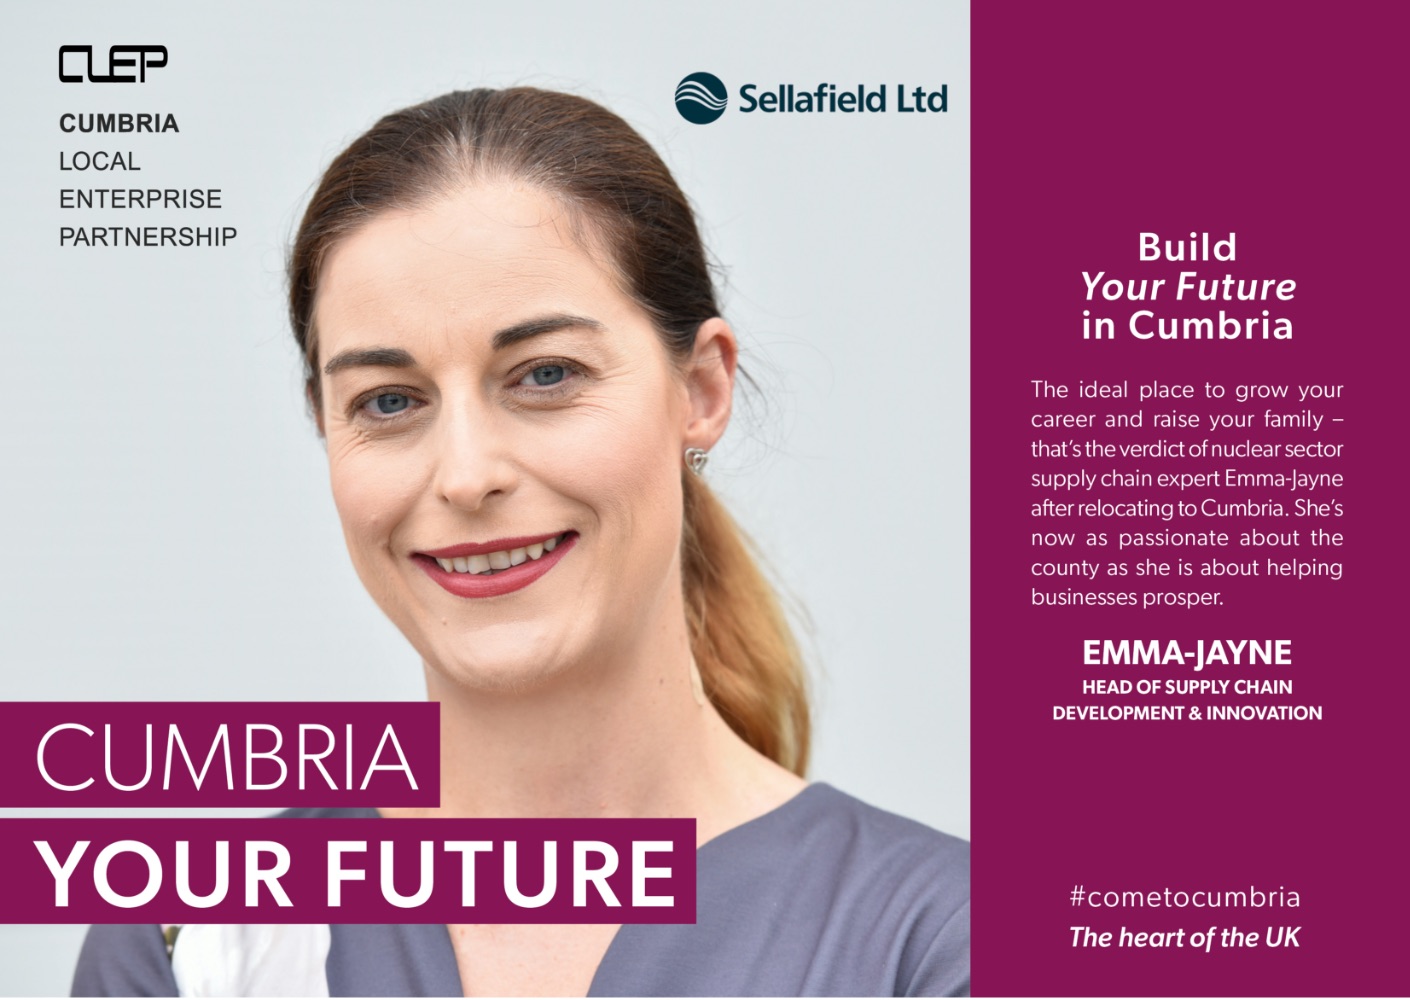 Build Your Future In Cumbria: The ideal place to grow your career and raise your family - that's the verdict of nuclear sector supply chain expert Emma-Jayne after relocating to Cumbria. She's now as passionate about he county as she is helping businesses prosper. (Photo: Emma-Jayne, Head of Supply Chain Development & Innovation).